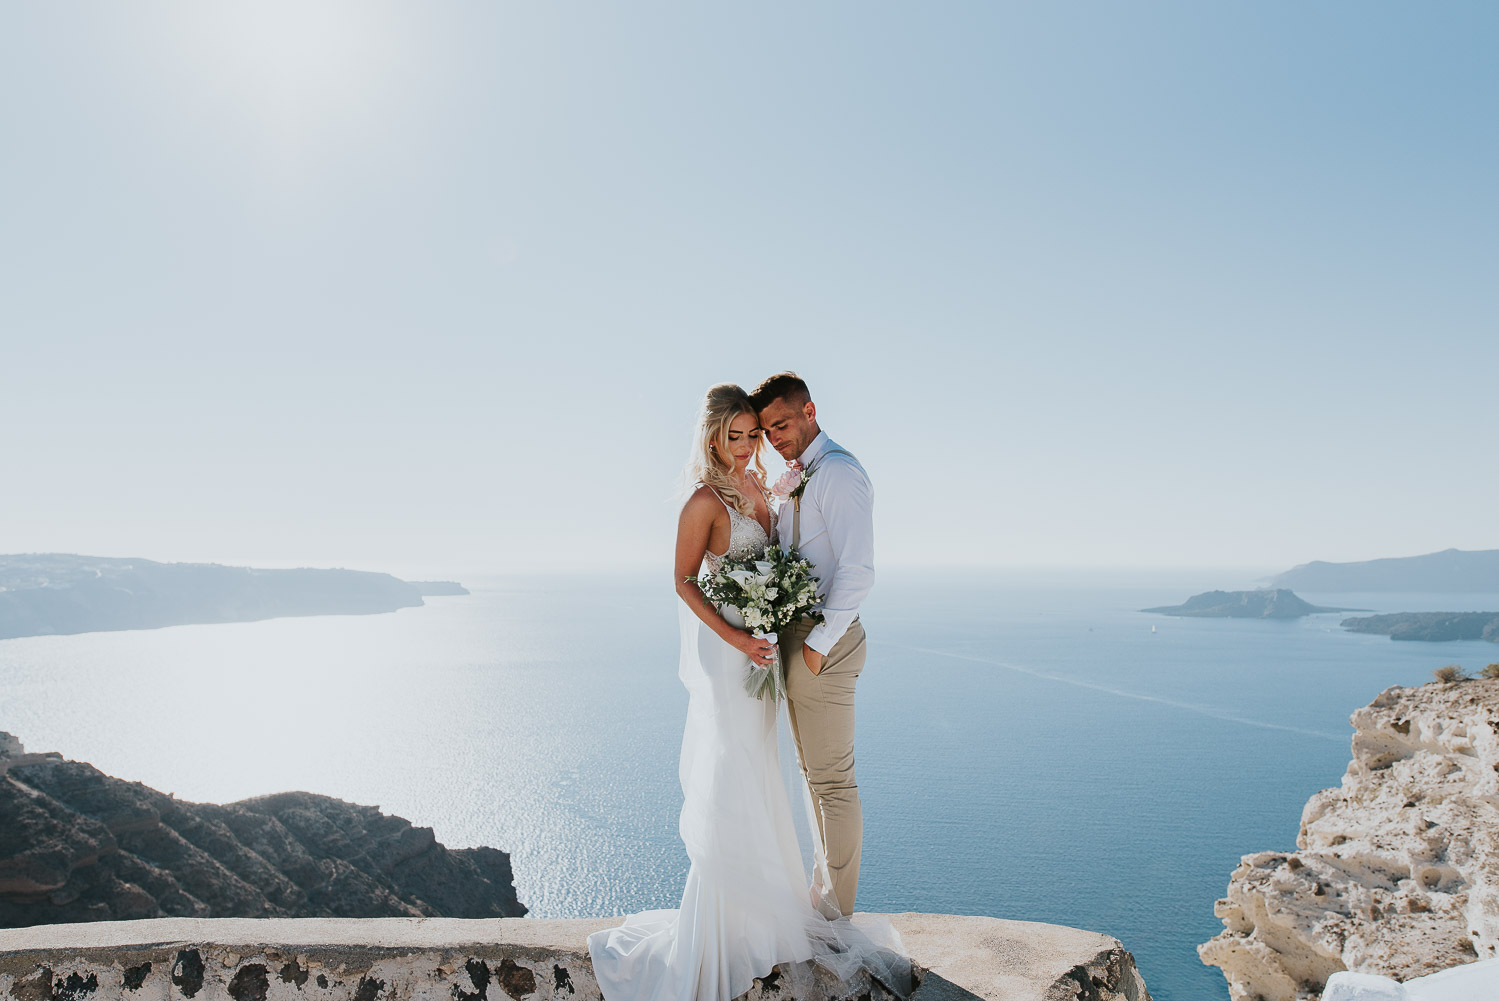 Wedding photographer Santorini: panoramic photo of bride and groom surrounded by the sea and the sky behind them by Ben and Vesna.